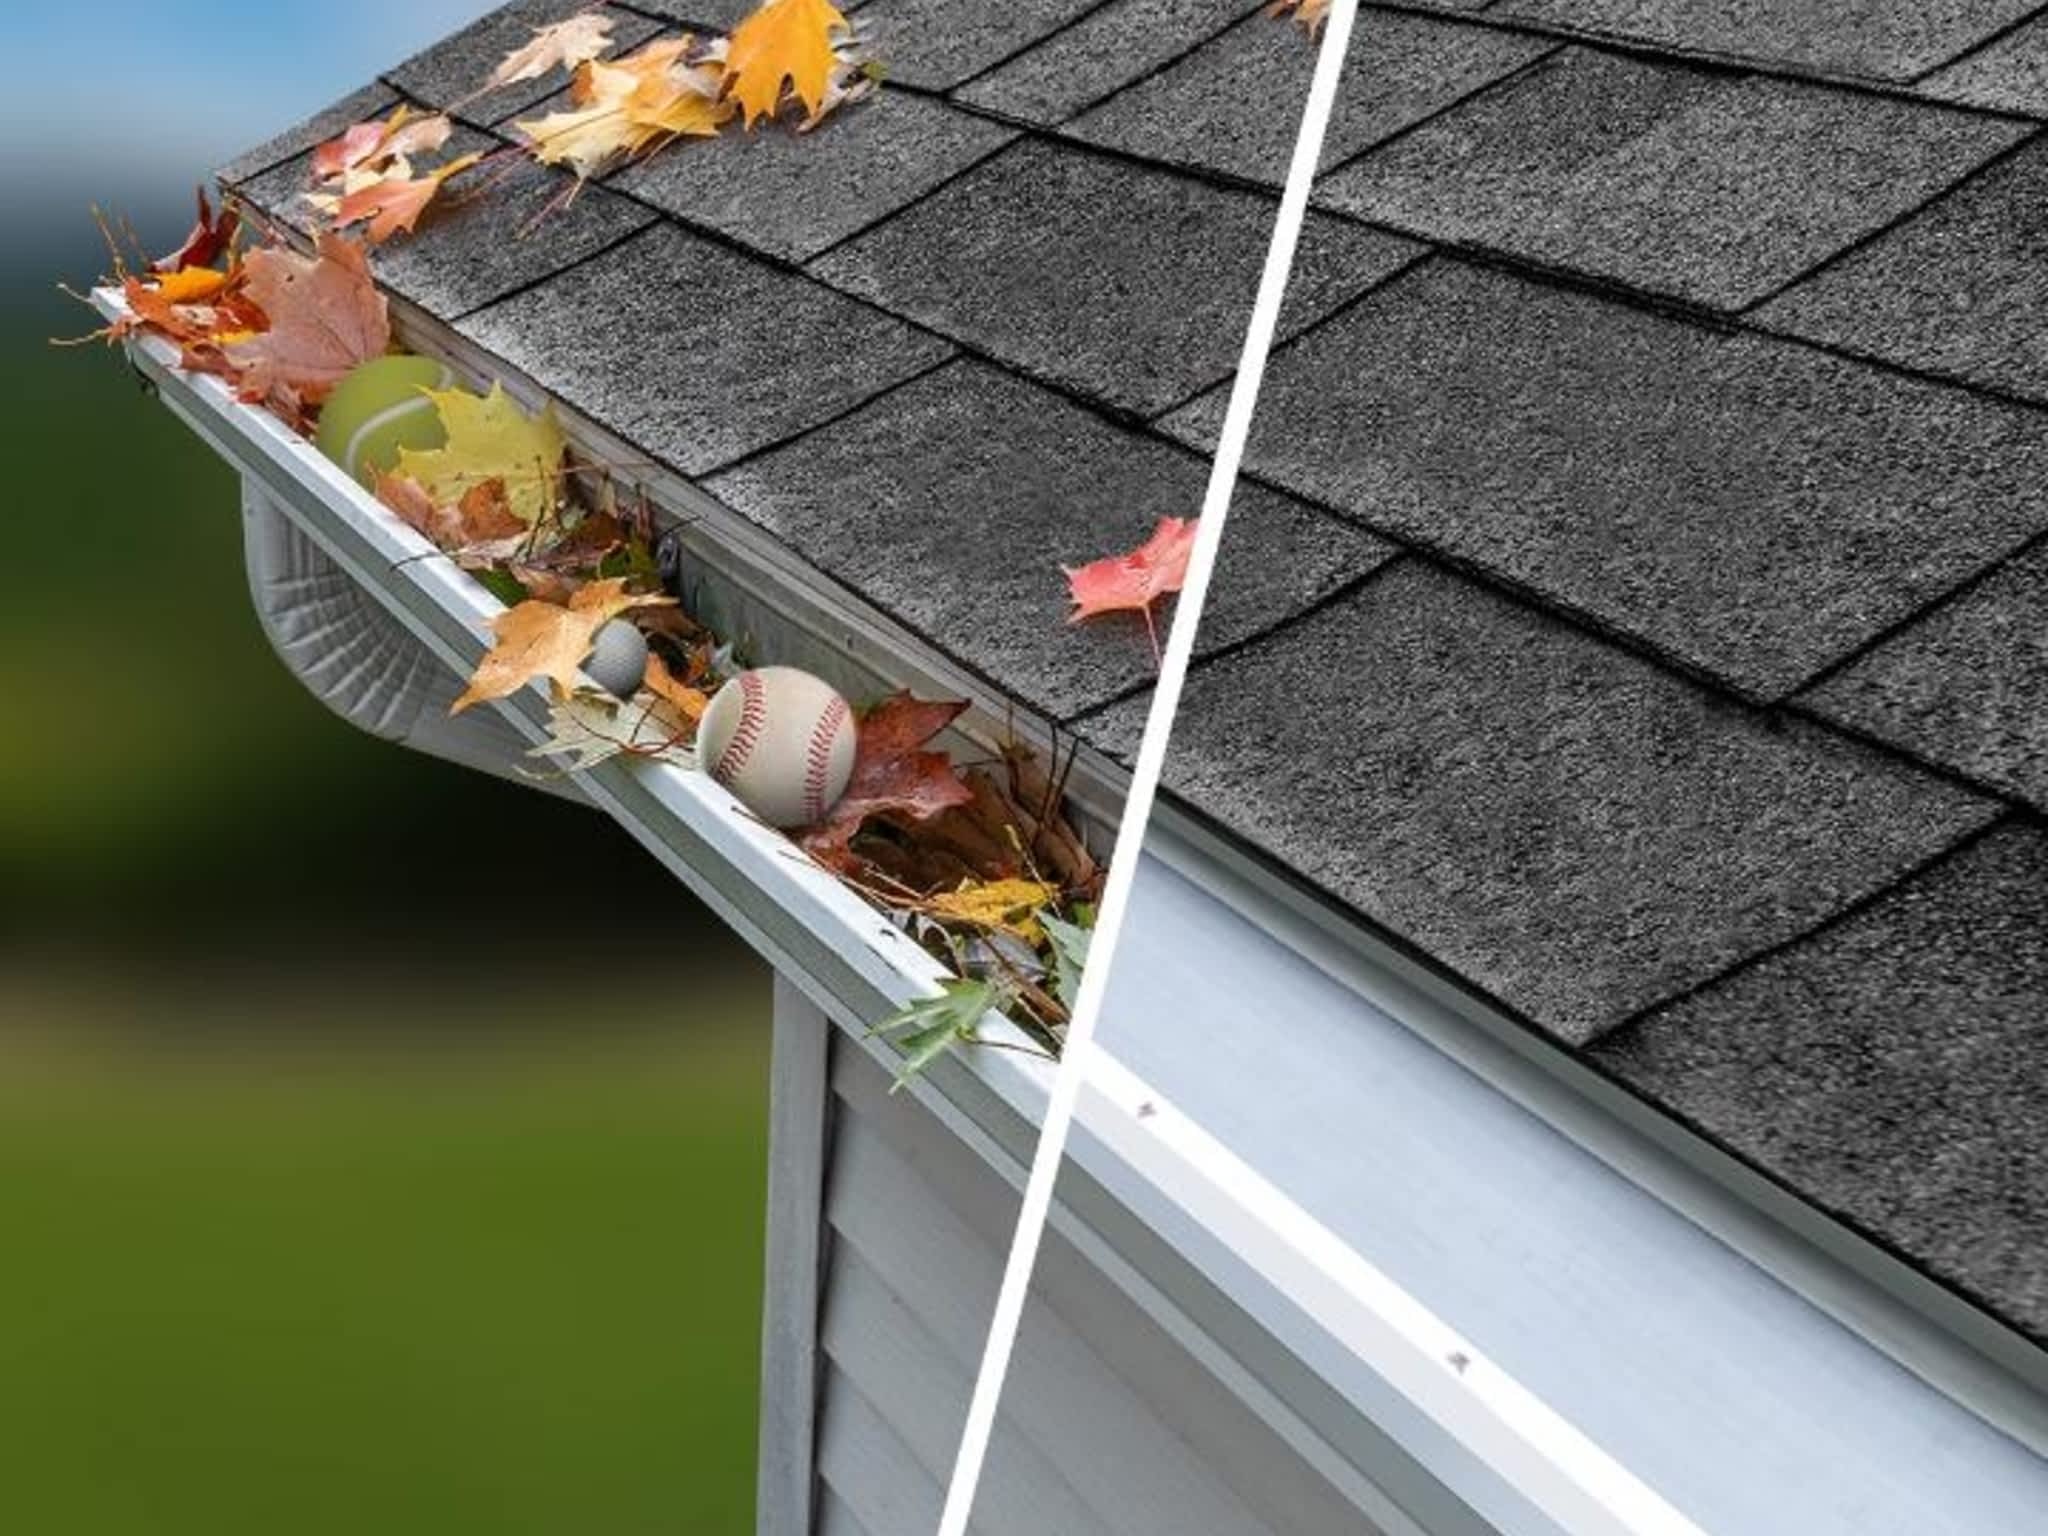 photo LeafFilter Gutter Protection